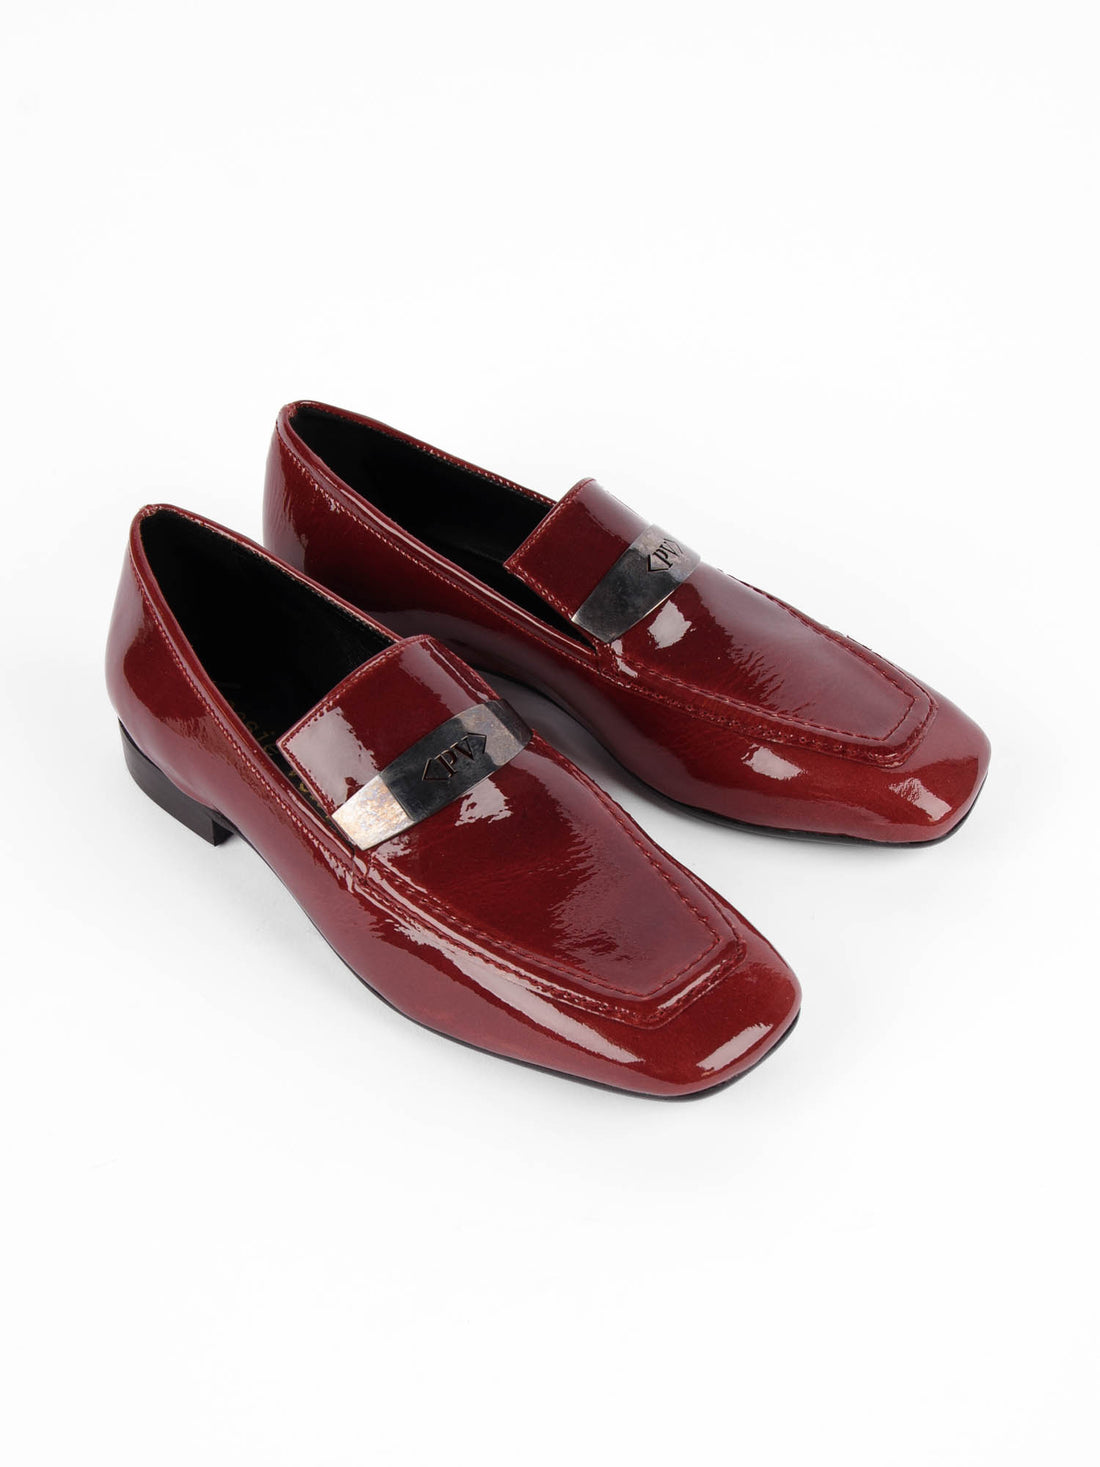 KIG54 PATENT LEATHER LOAFERS